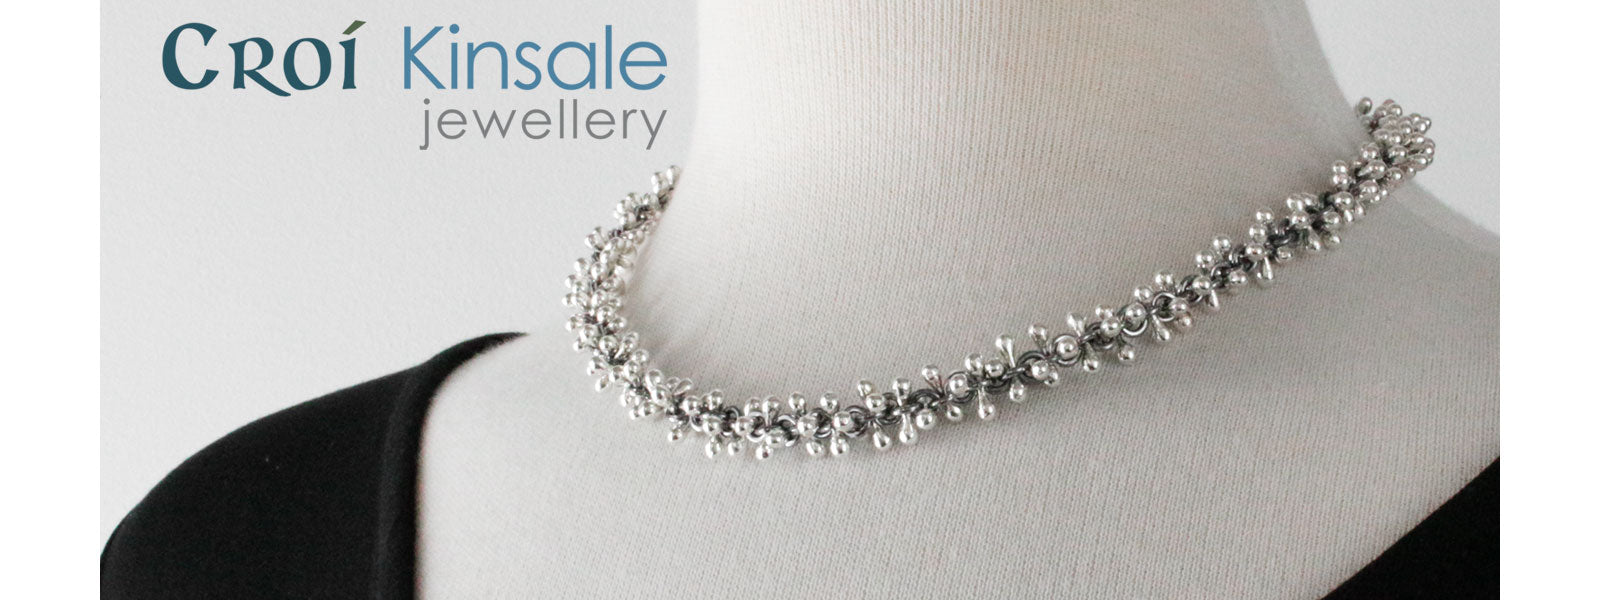 The Perfect Gift ideas Silver Necklace Jewelry Ireland Kinsale